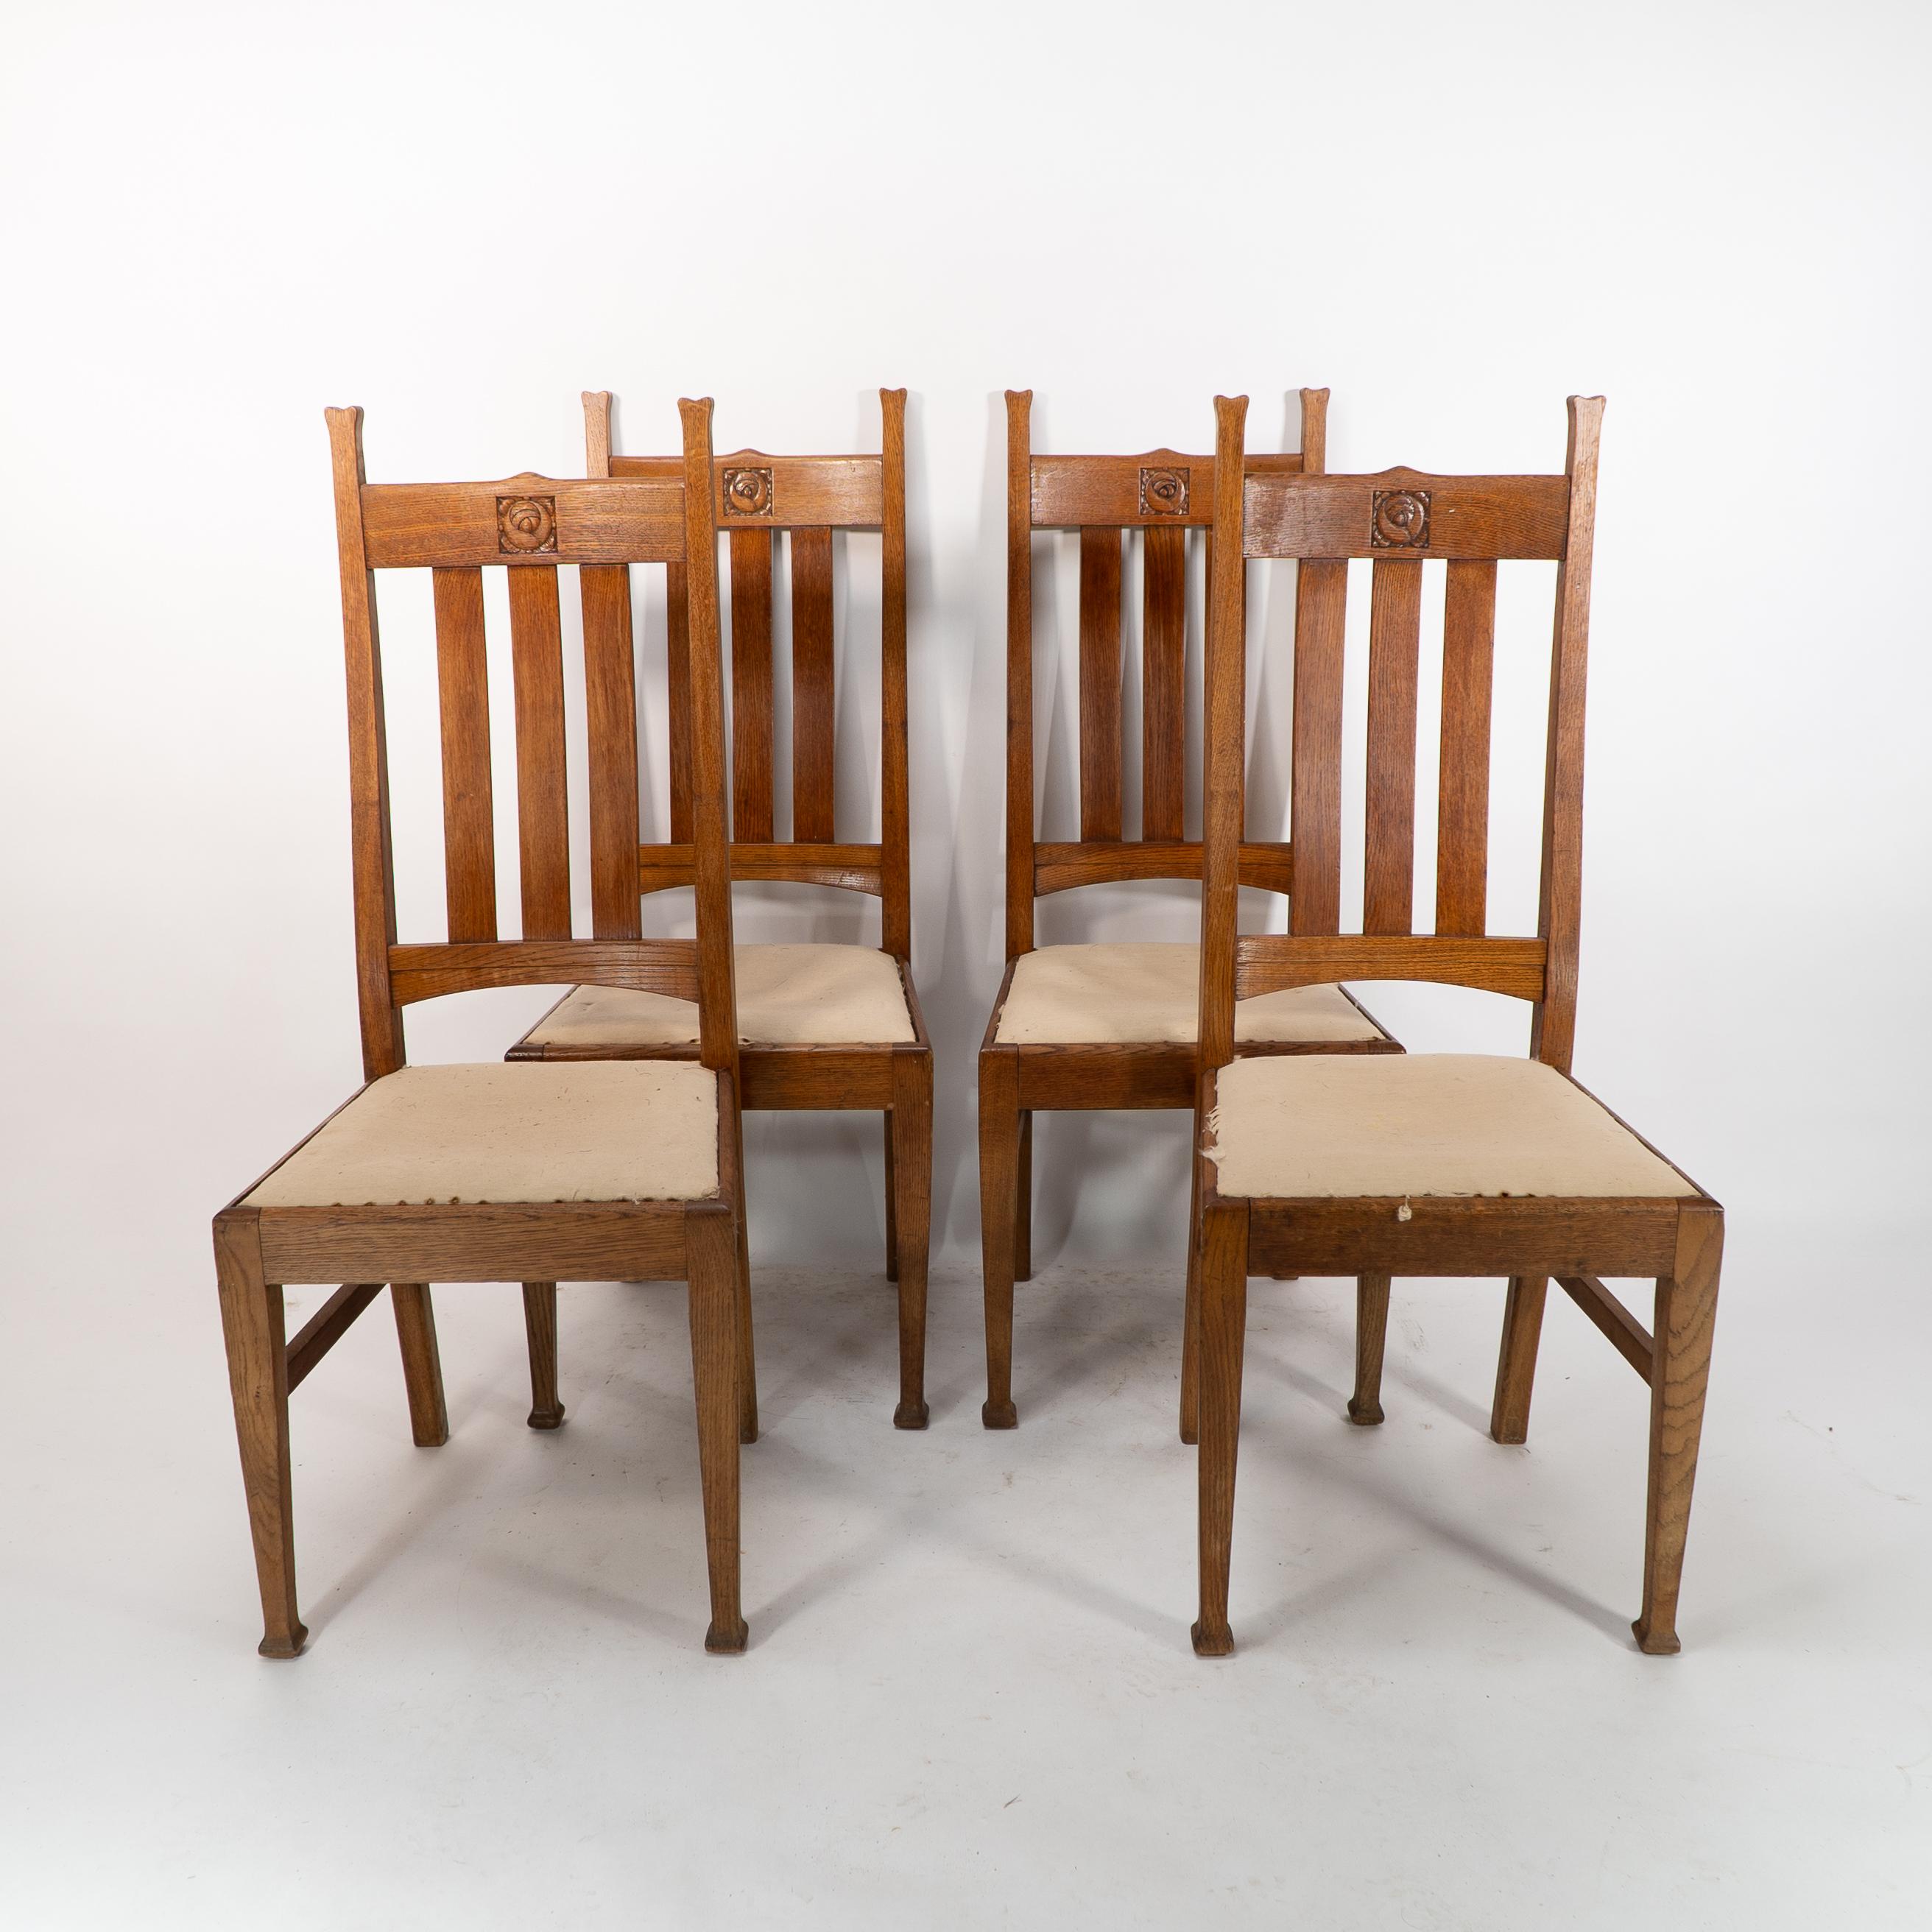 E A Taylor for Wylie and Lochhead Glasgow. A Set of four Arts and Crafts oak dining chairs with carved floral decoration to the head rests and a shaped comfortable back, drop in seats, high stretchers, standing on square tapering legs. Price for the